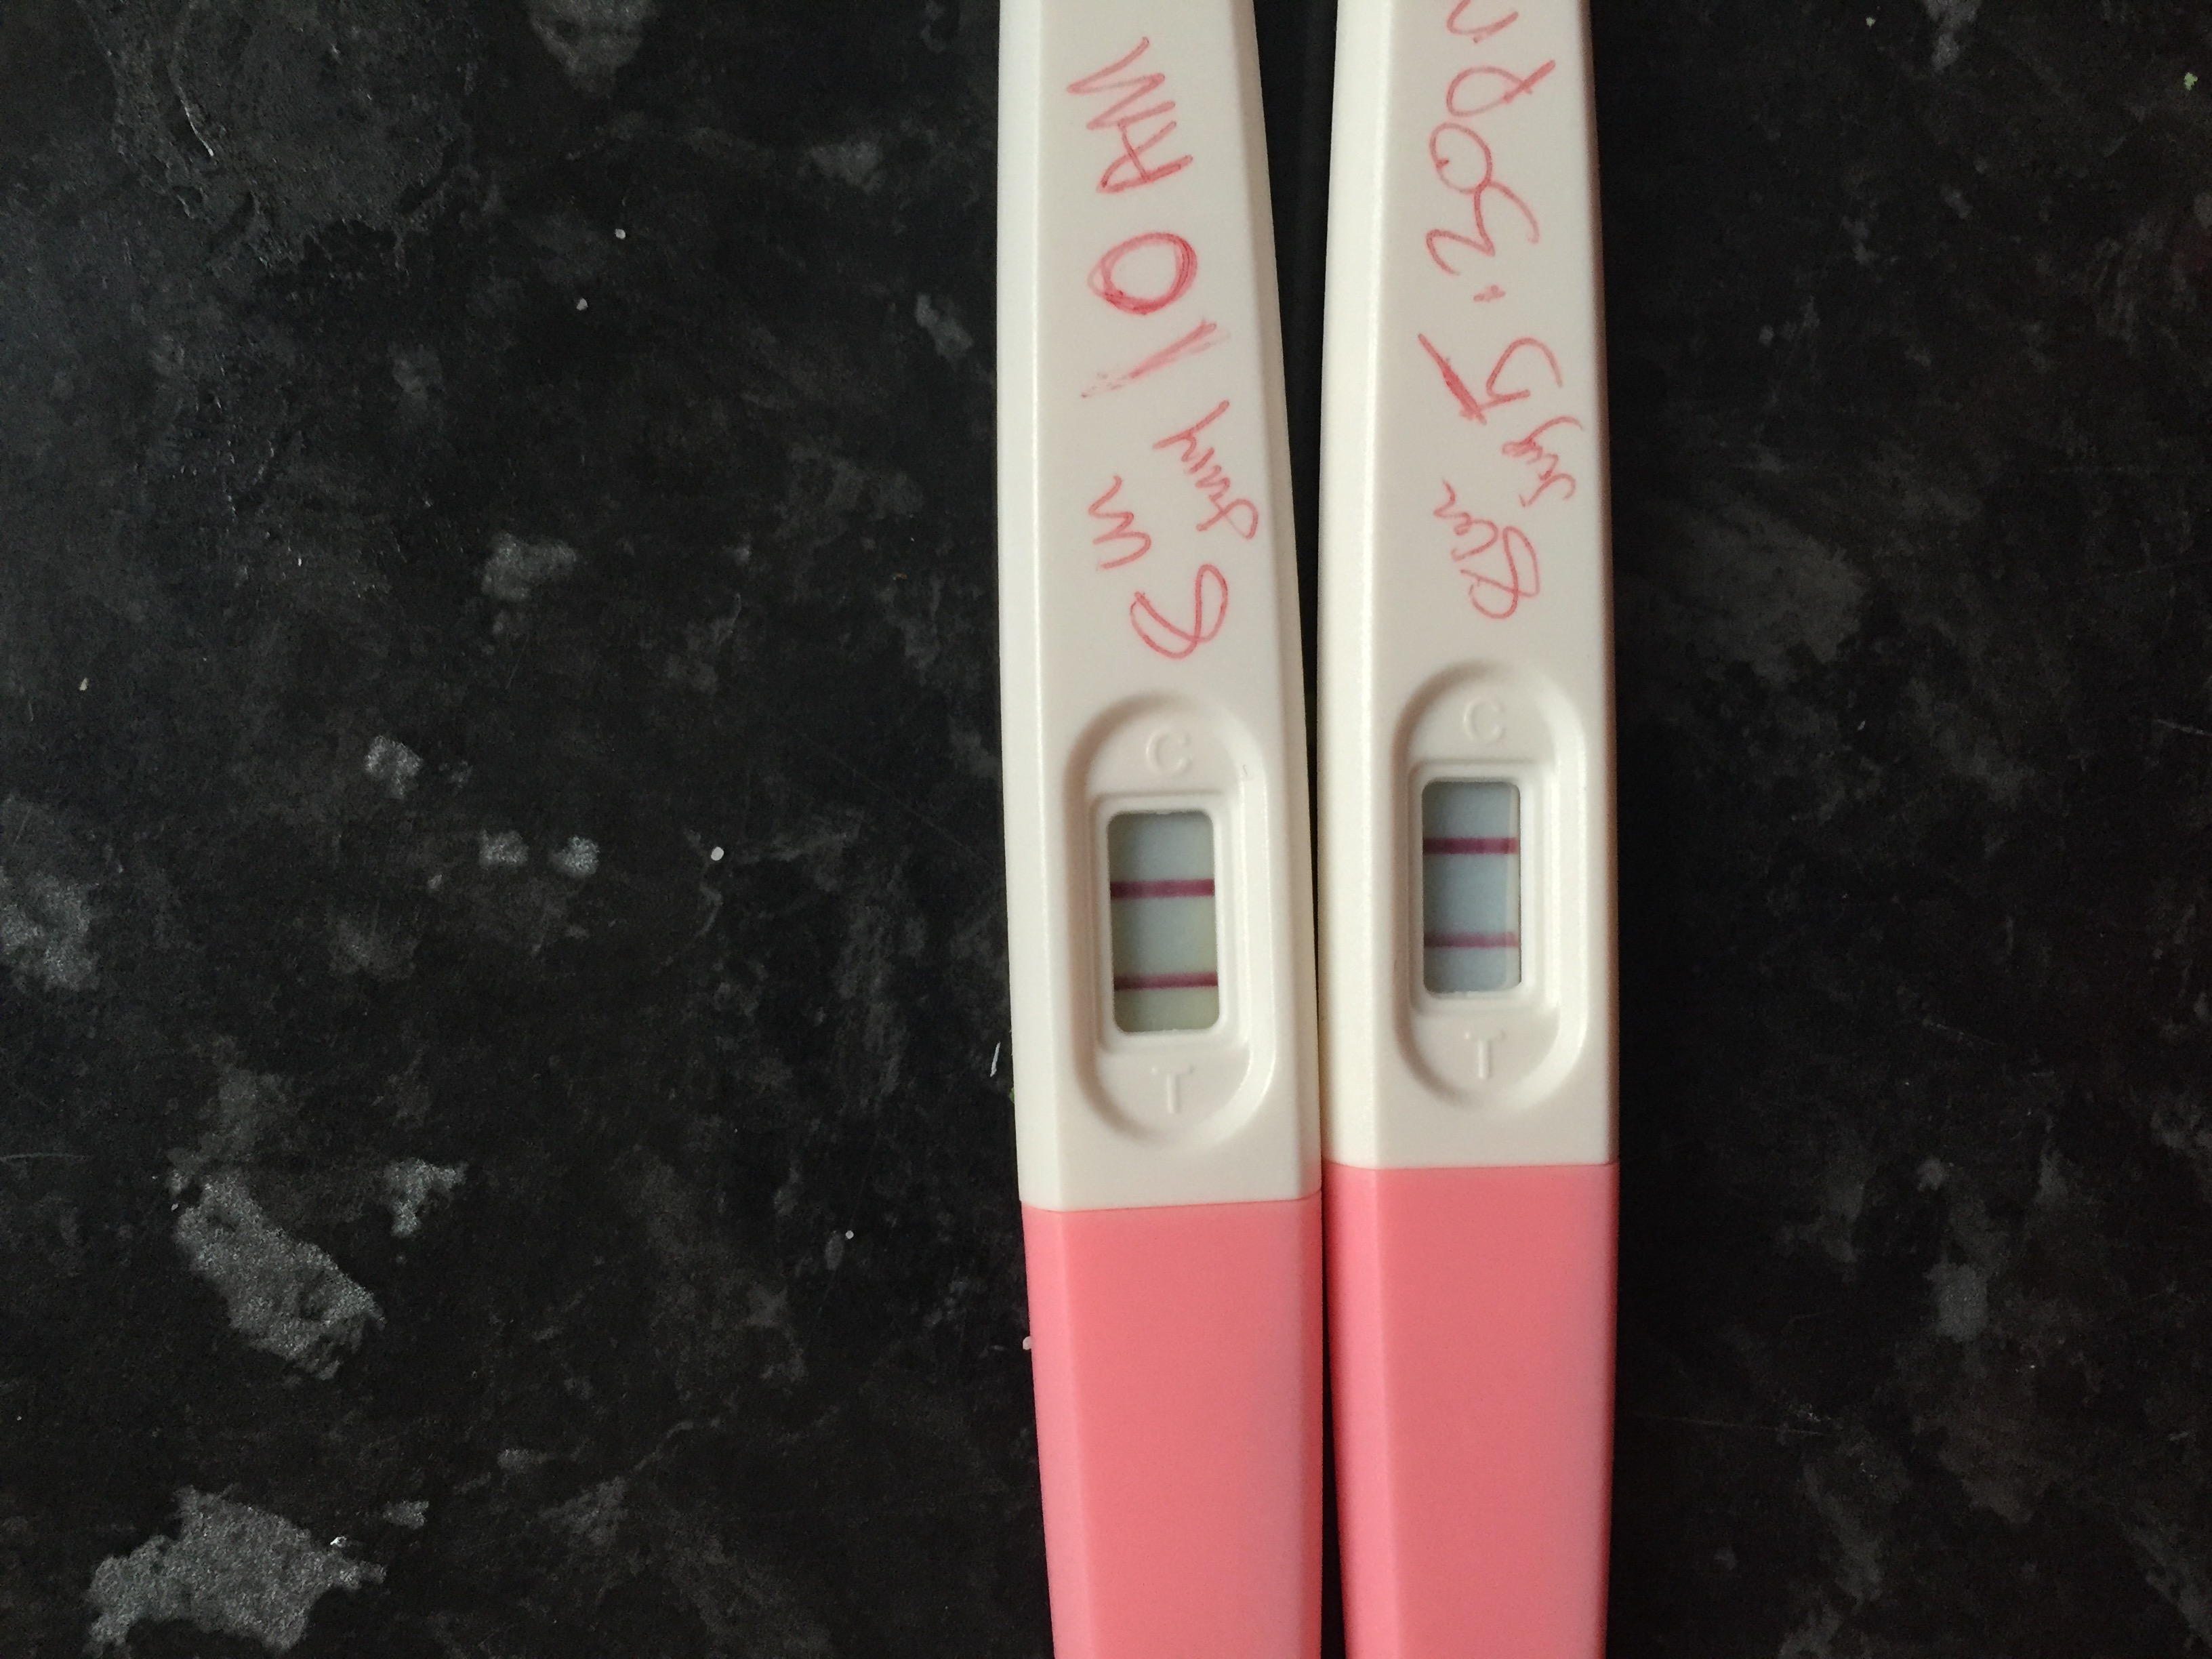 My Ovulation Test Is Positive When Should I Have Sex